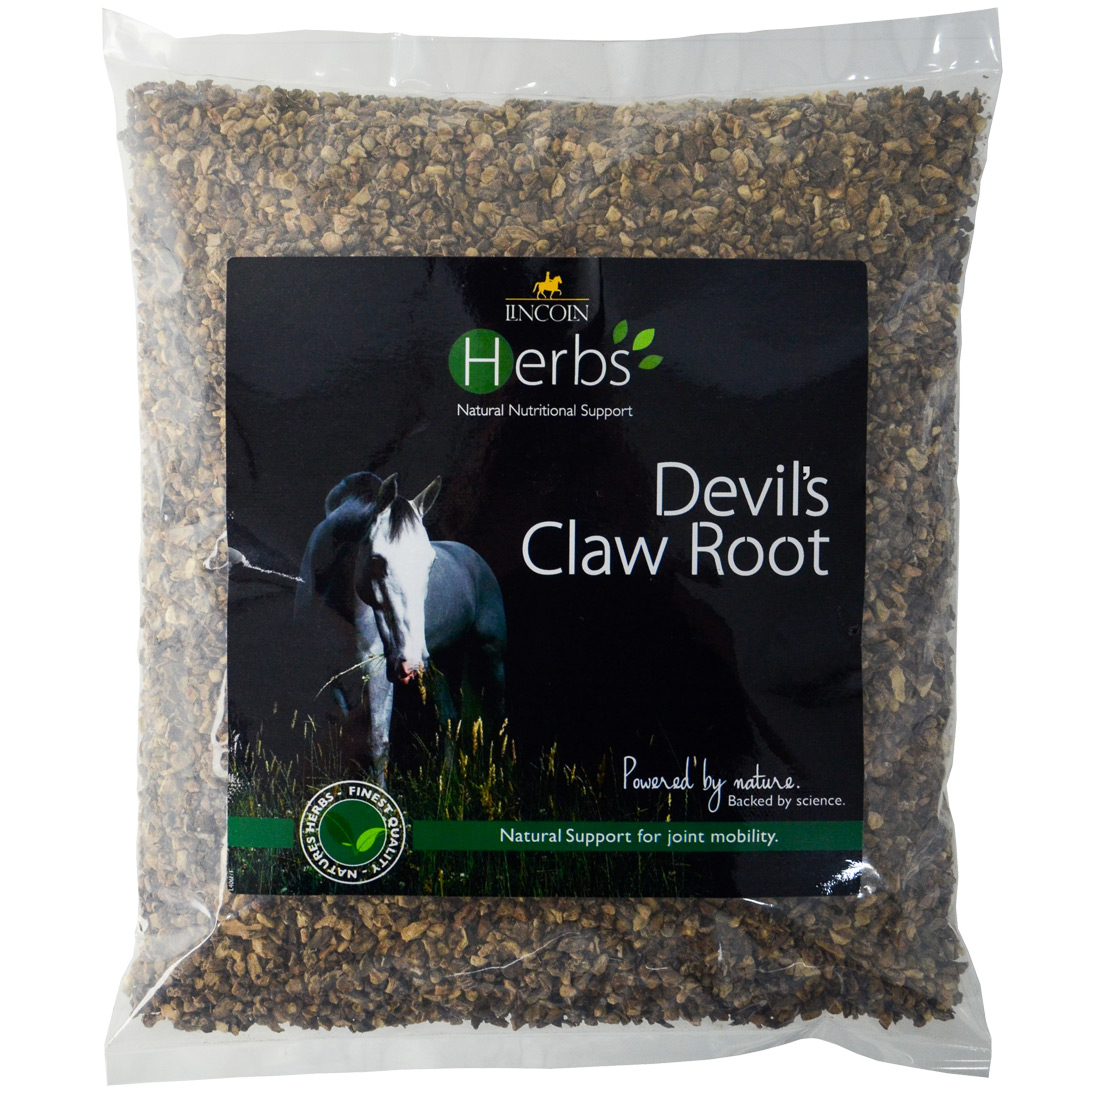 Lincoln Herbs Devils Claw Root – 1kg